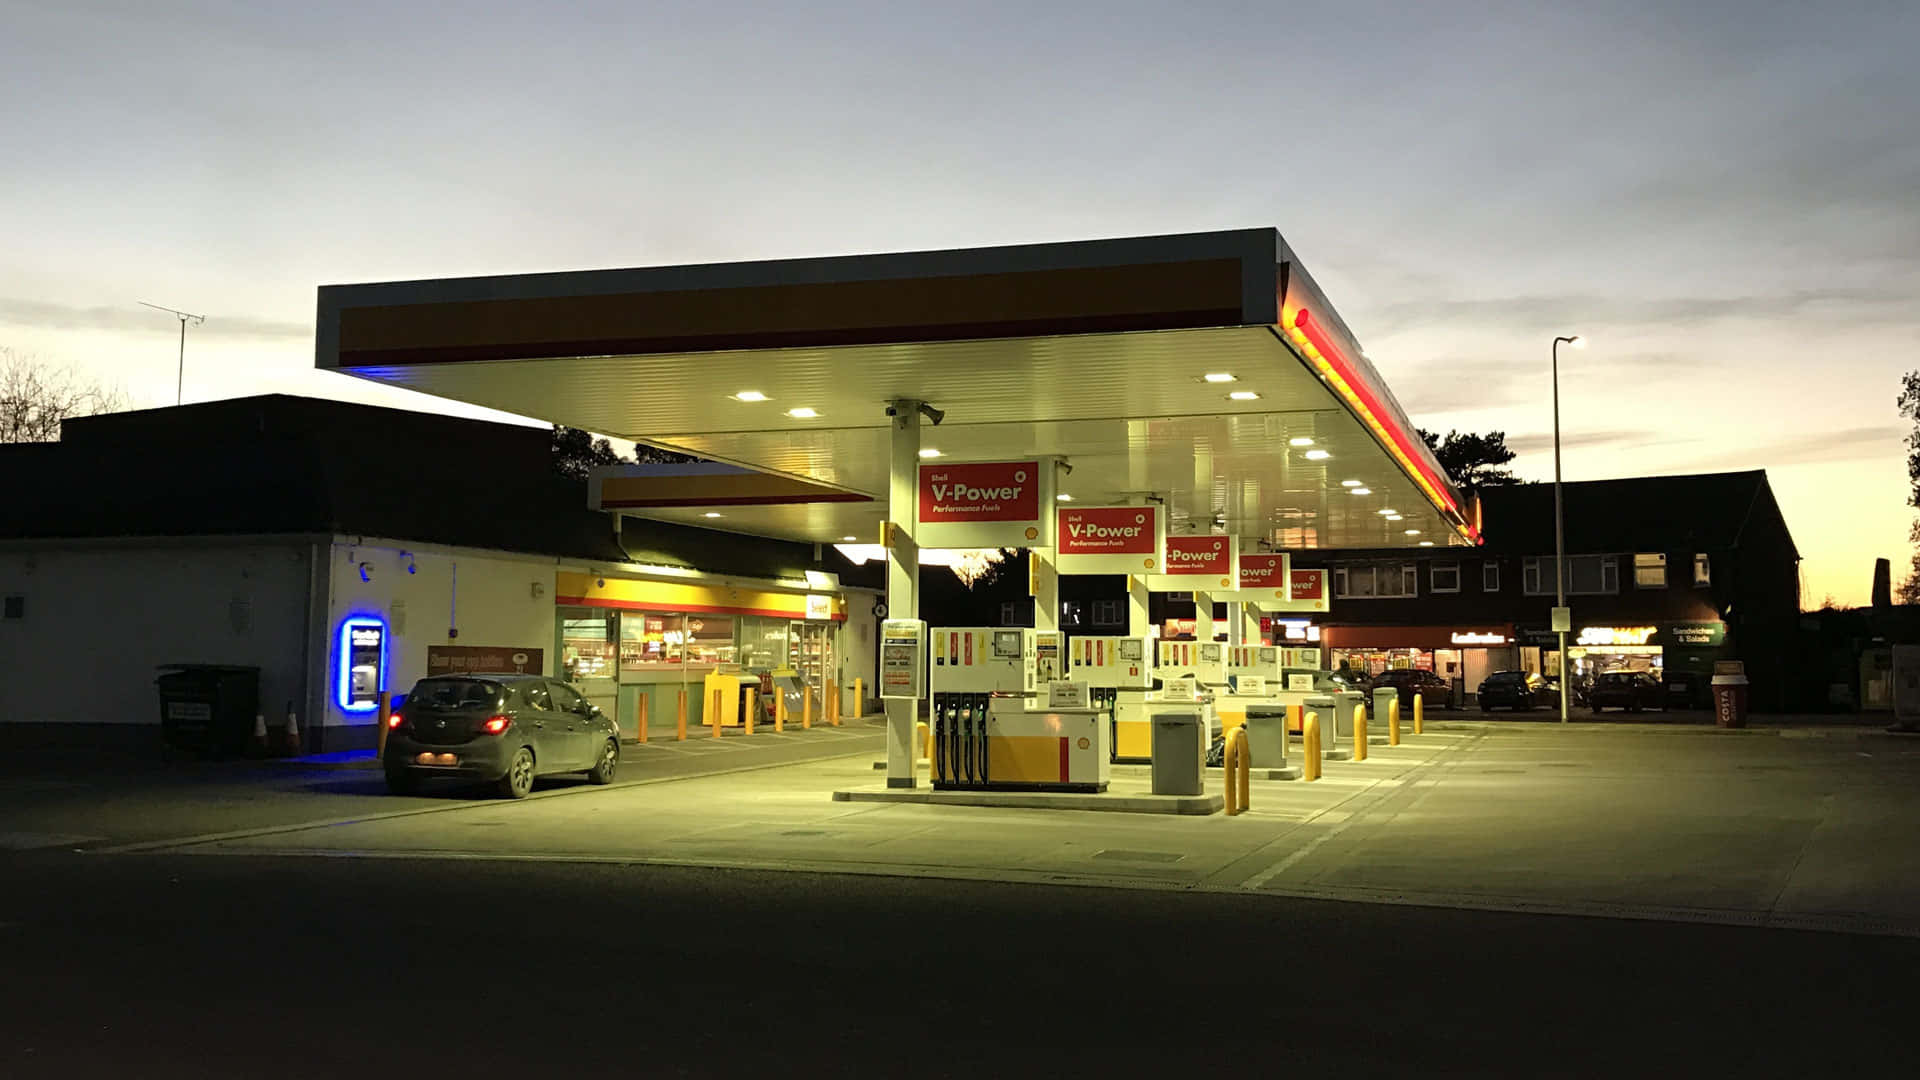 Get ready for your journey with the convenience of the modern petrol station.